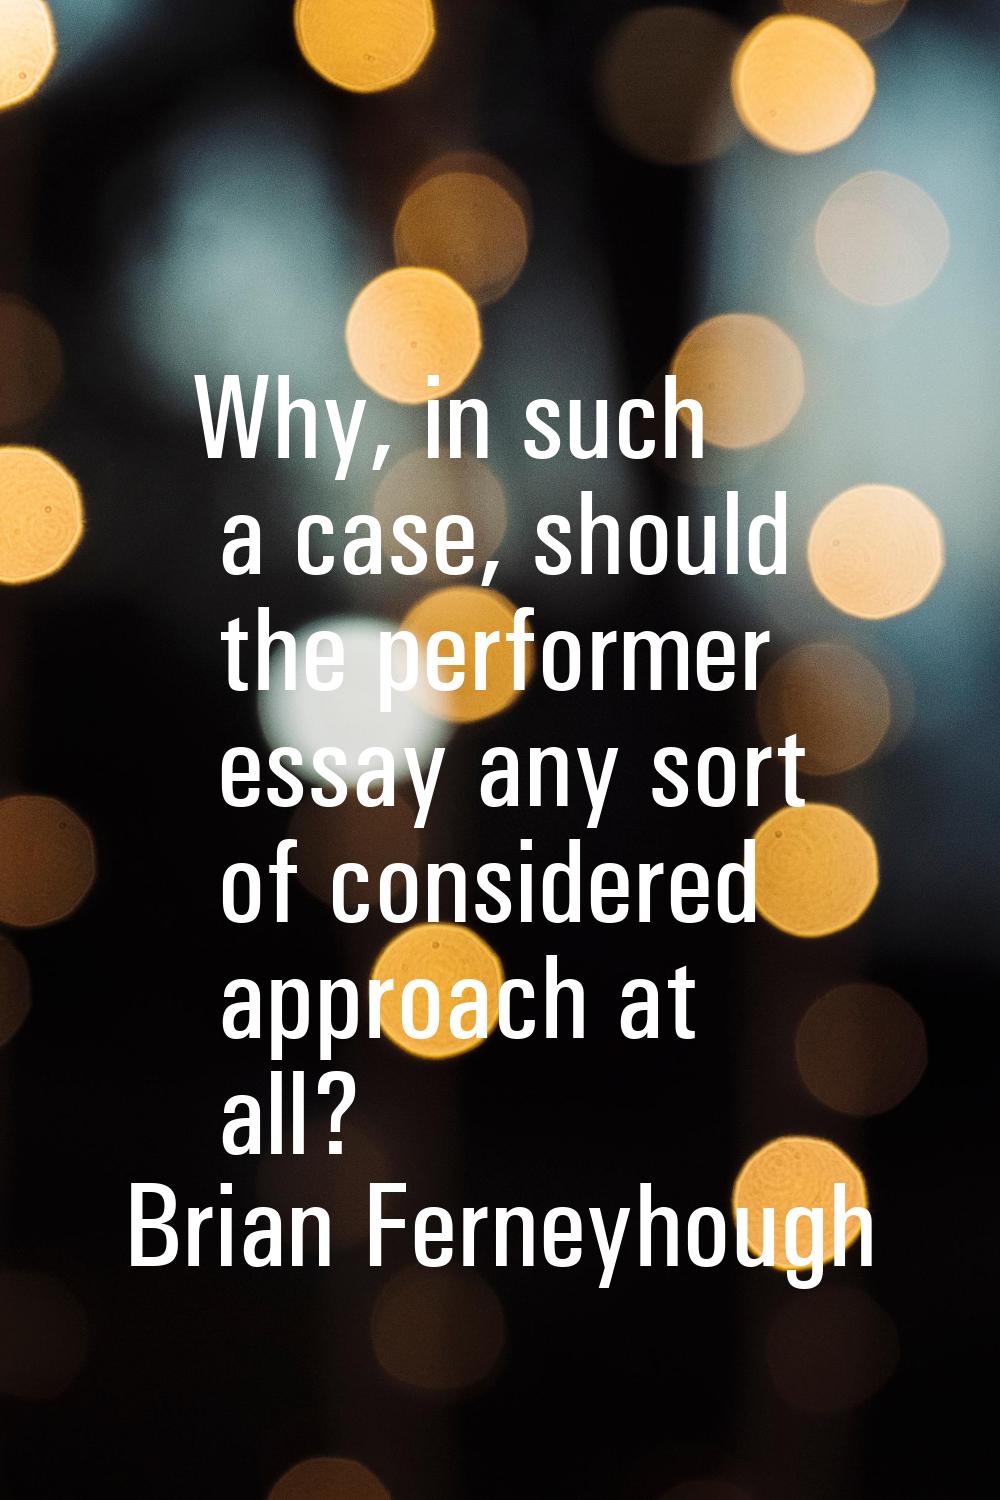 Why, in such a case, should the performer essay any sort of considered approach at all?